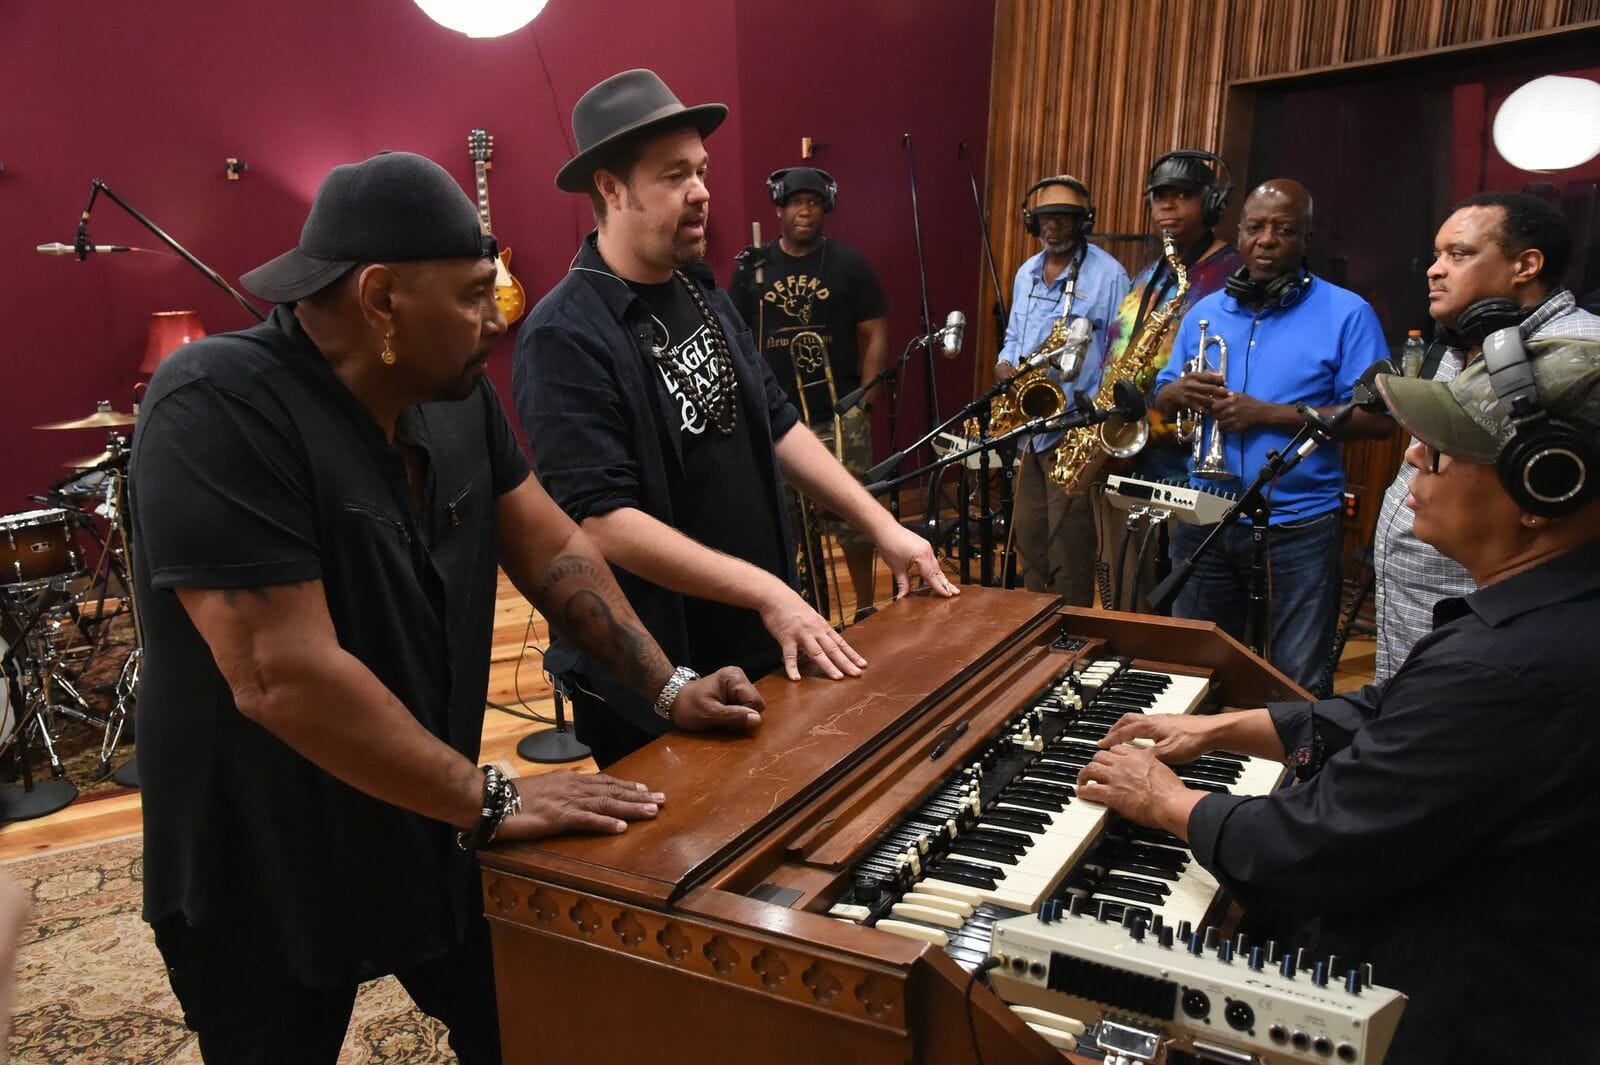 Video Premiere: Aaron Neville featuring Dirty Dozen Brass Band “Stomping Ground” from ‘Take Me To The River: New Orleans’